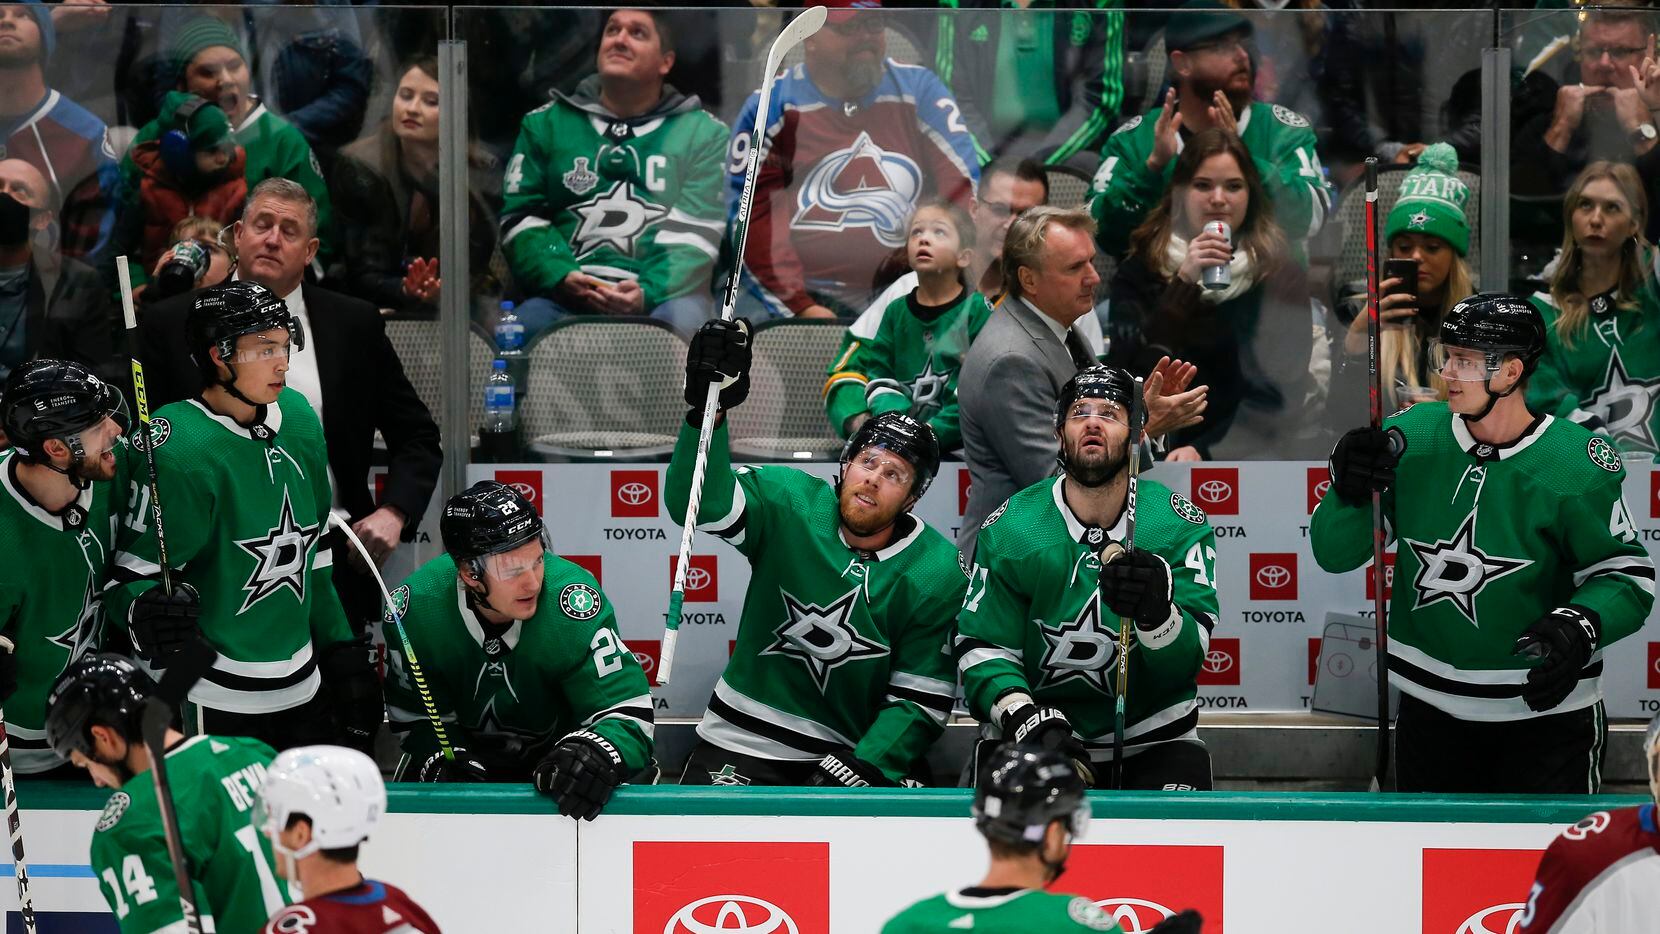 Dallas Stars forward Joe Pavelski, center, acknowledges fans after it was announced that he had scored 400 NHL career goals, with his second goal of the game, during the first period of an NHL hockey game against the Colorado Avalanche in Dallas, Friday, November 26, 2021. (Brandon Wade/Special Contributor)